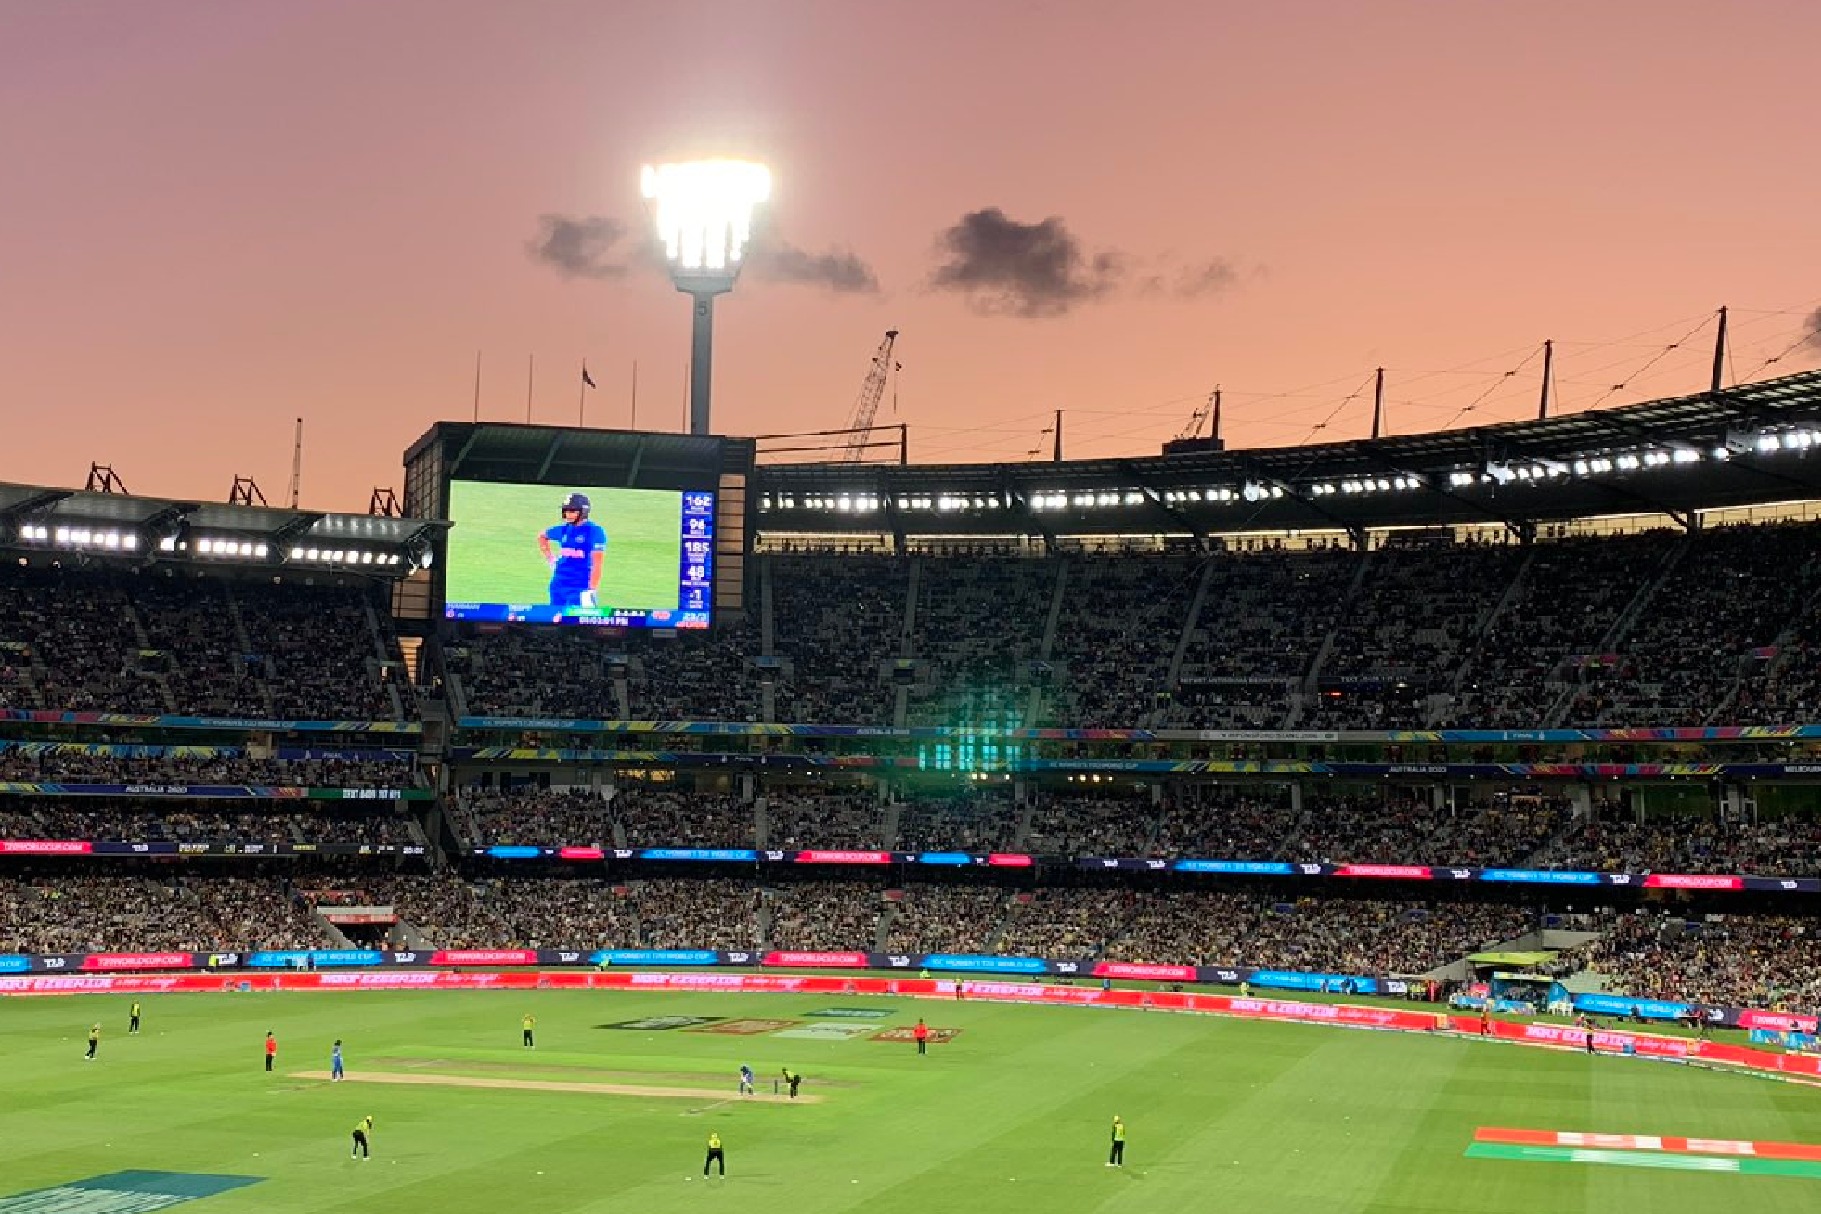 Spectator at T20 World Cup final tests positive for coronavirus